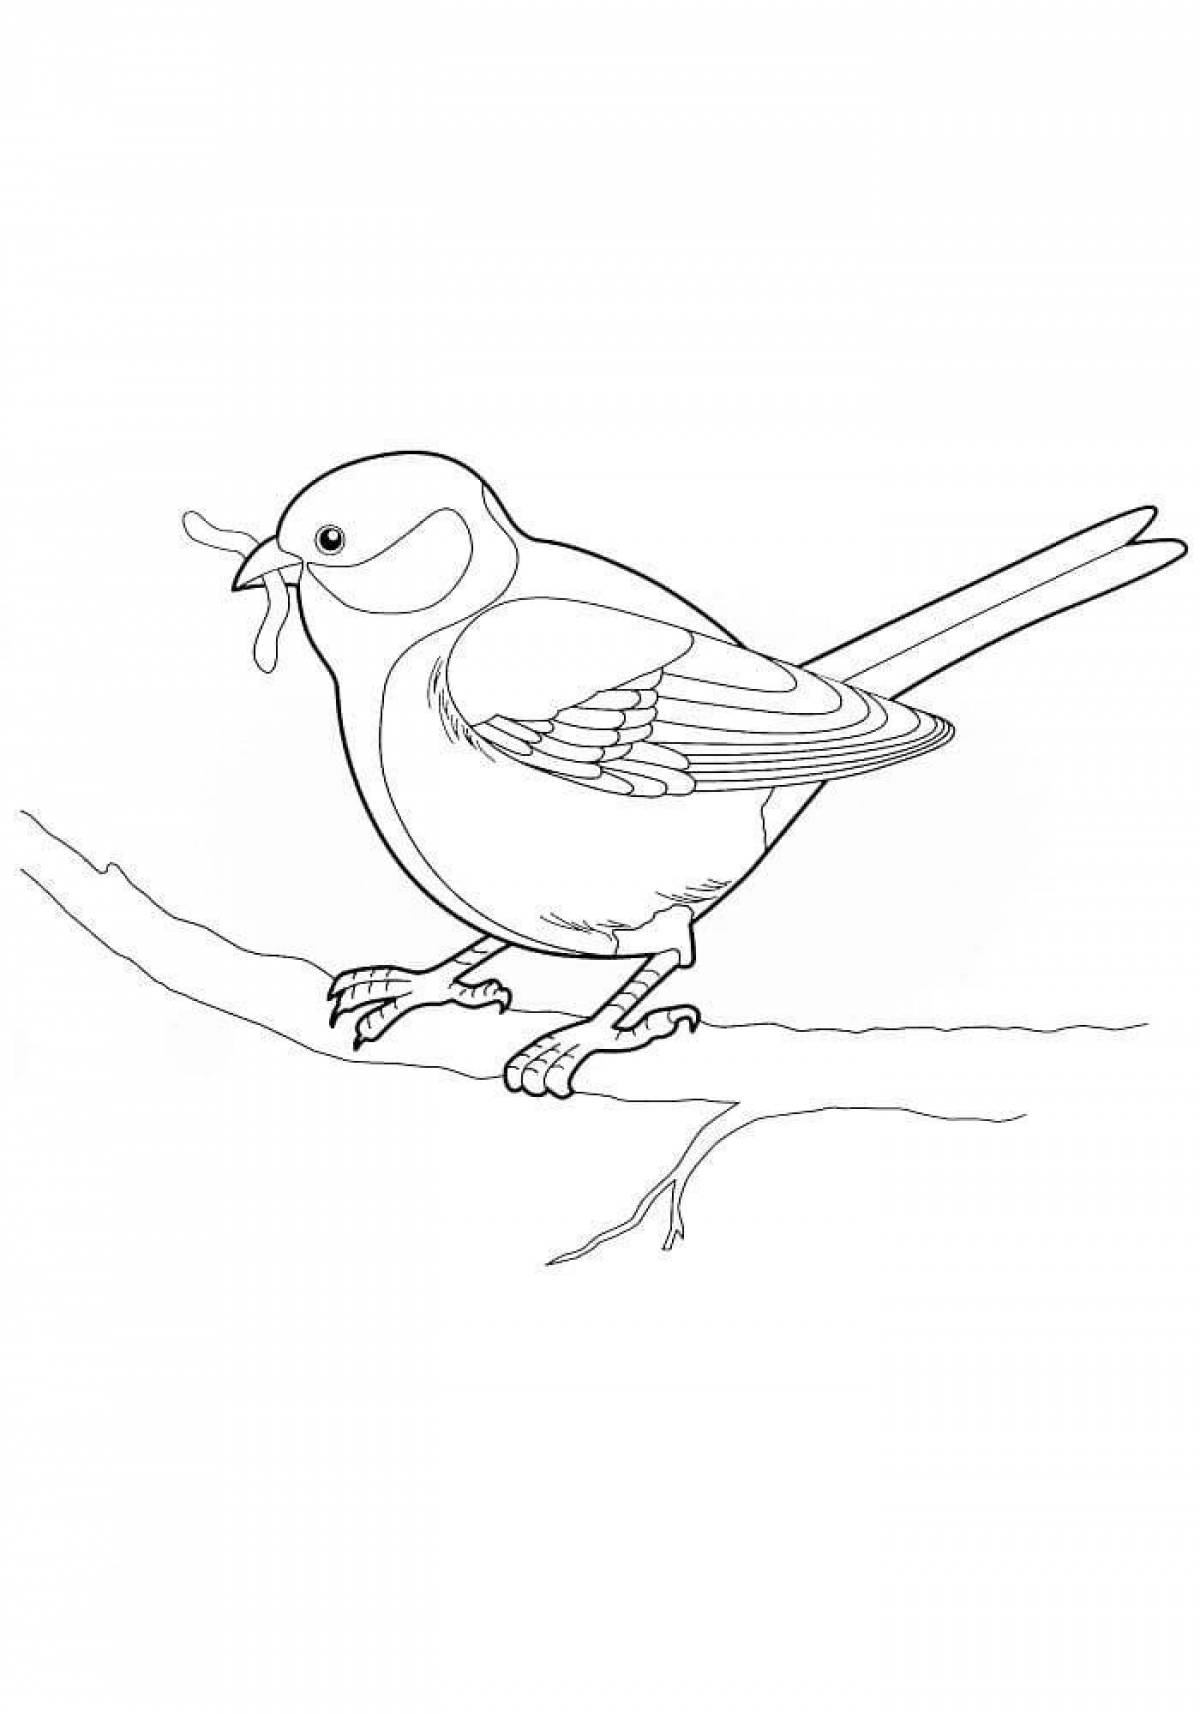 Live tit coloring for kids